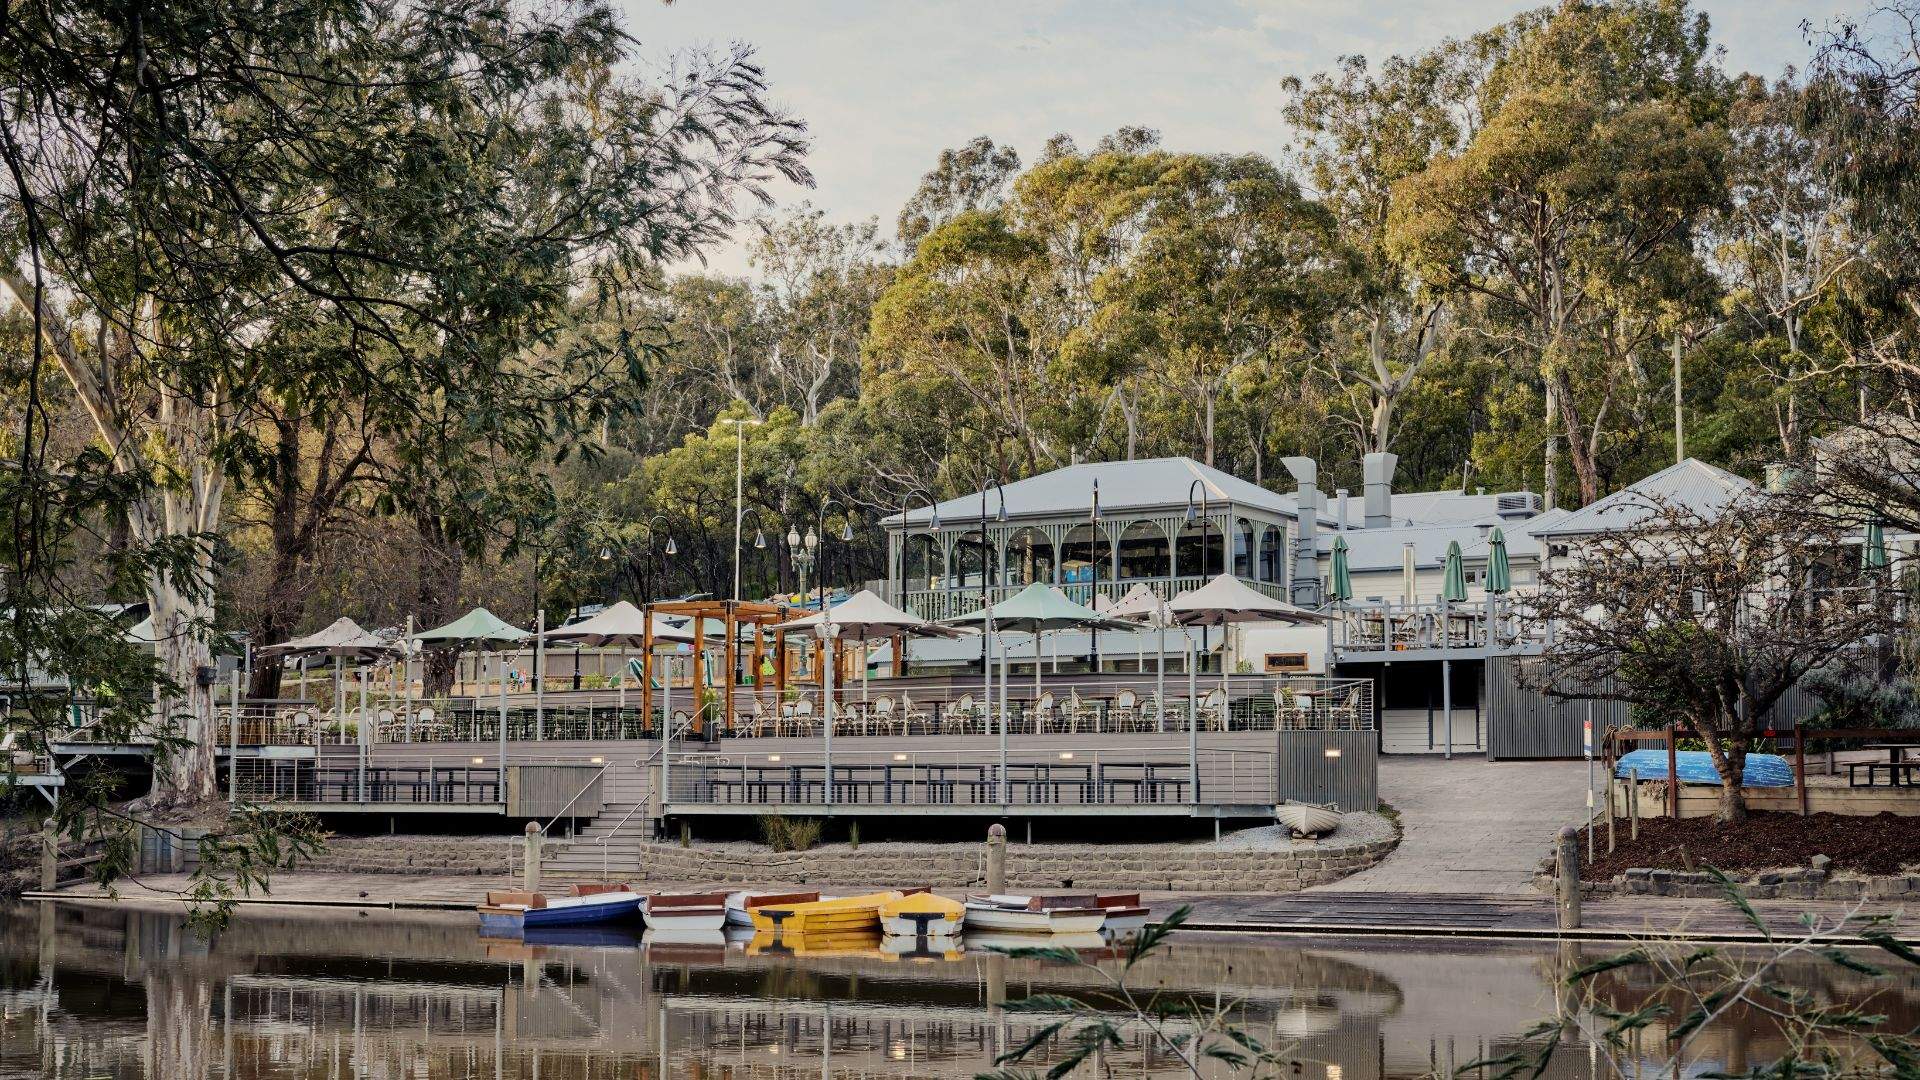 Now Open: Studley Park Boathouse Has Officially Reopened Following a $5.8-Million Makeover